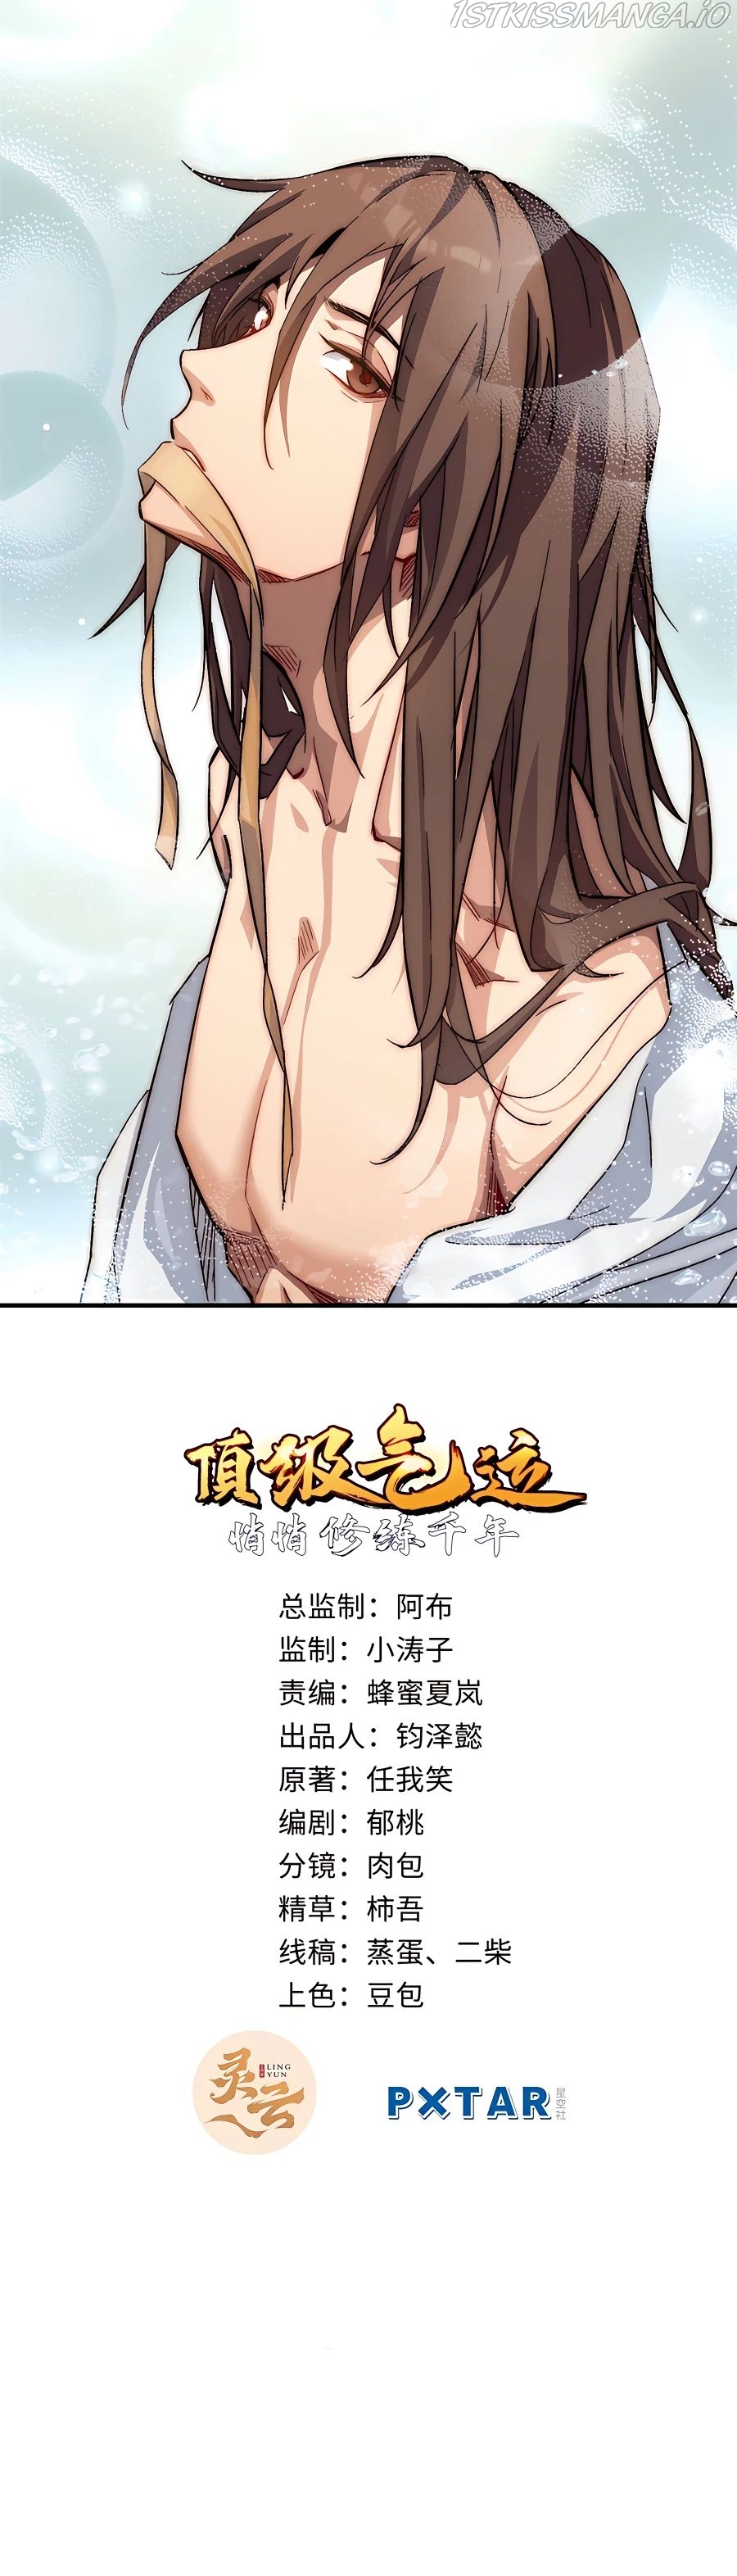 {Top tier providence} good as always. : r/Manhua